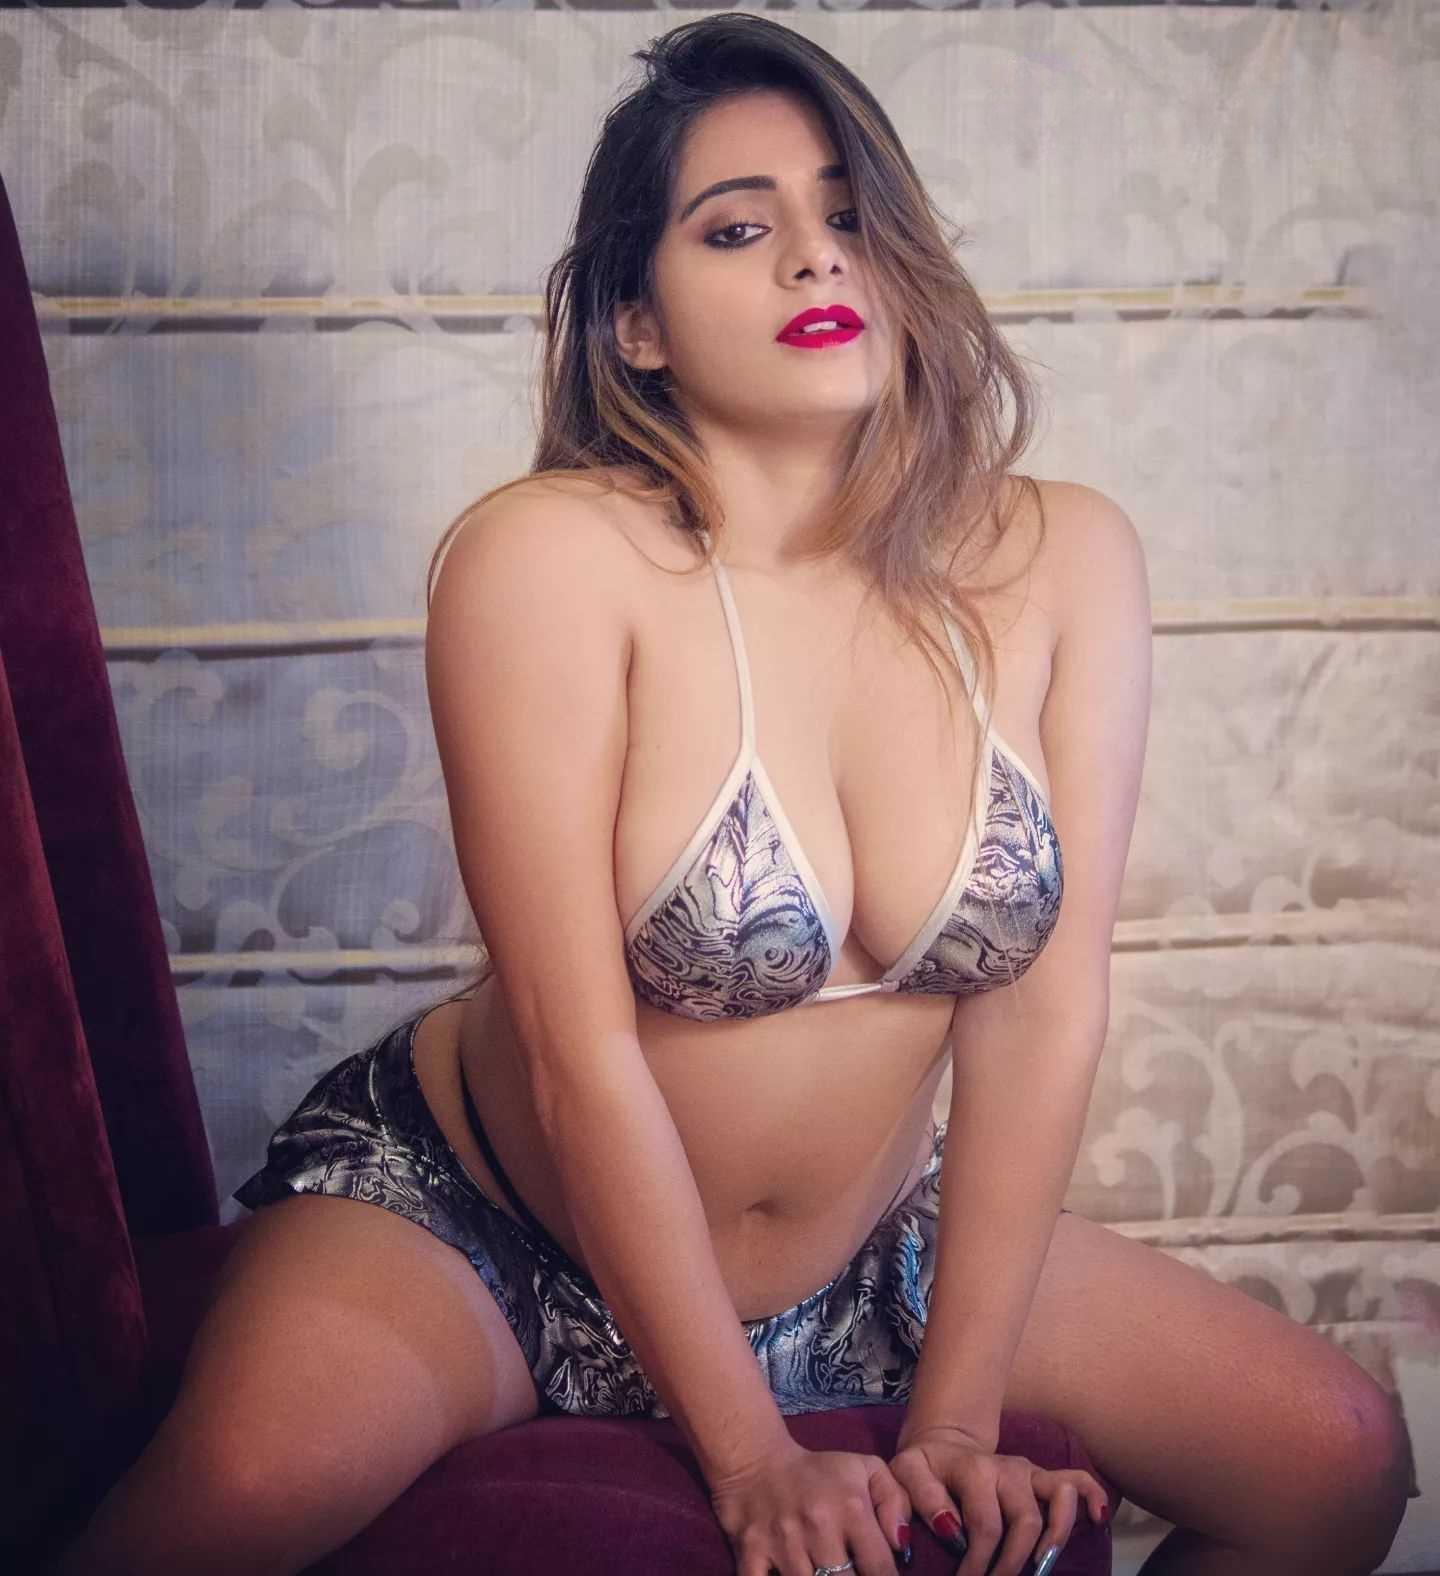 Sexy Queen Dipshika Roy Enjoys Herself Hotsarena Worlds Best Models And Actress Network